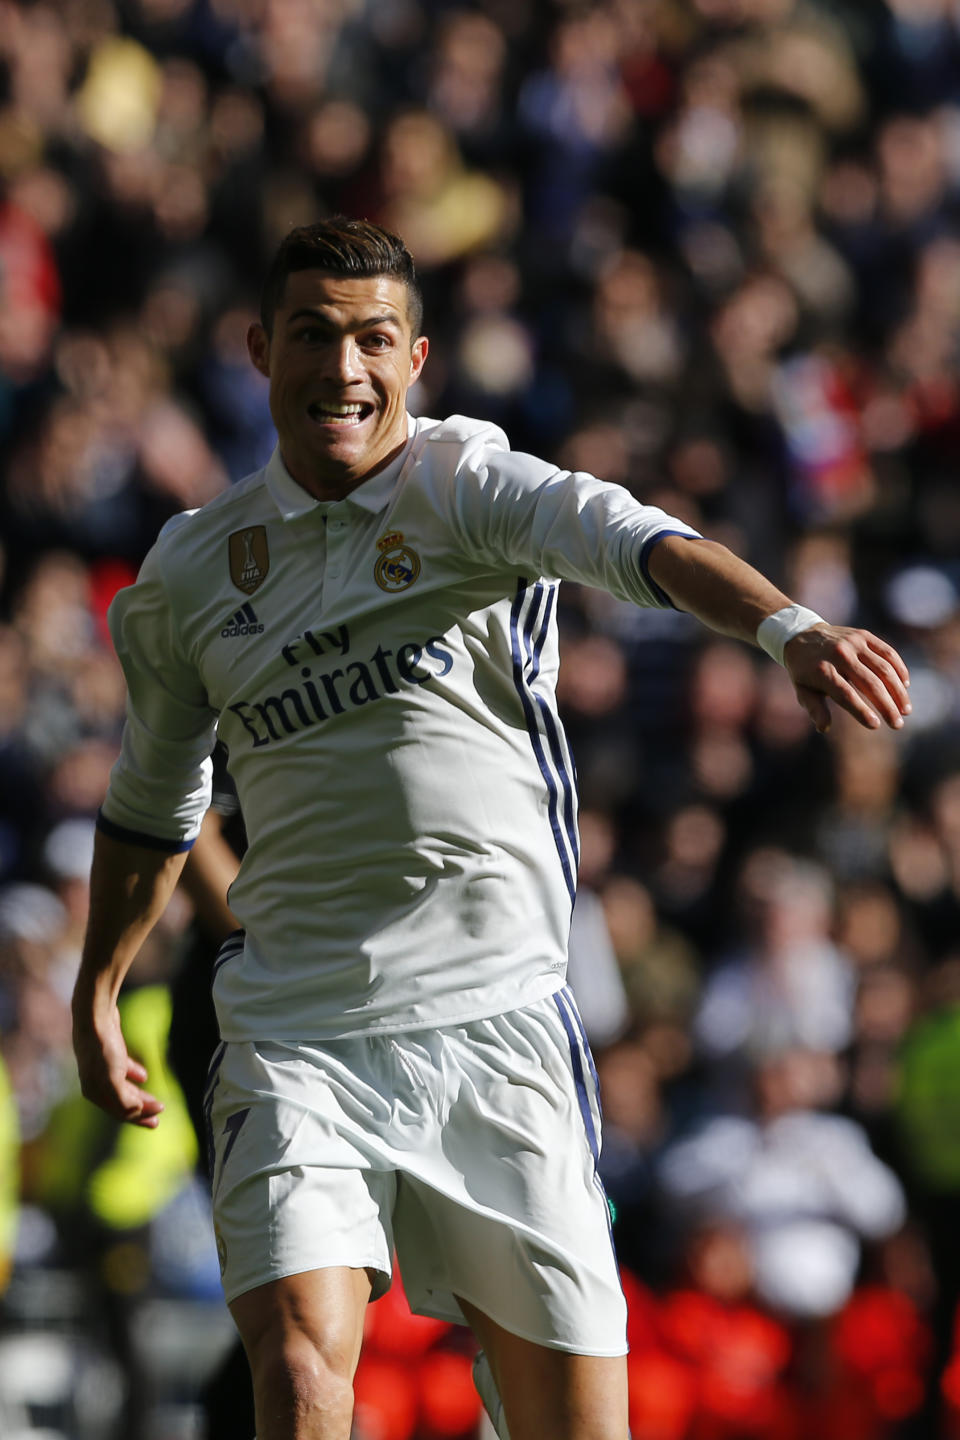 Real Madrid's Cristiano Ronaldo celebrates after scoring his team's third goal against Granada during the Spanish La Liga soccer match between Real Madrid and Granada at the Santiago Bernabeu stadium in Madrid, Saturday, Jan. 7, 2017. Ronaldo scored once in Real Madrid's 5-0 victory. (AP Photo/Francisco Seco)